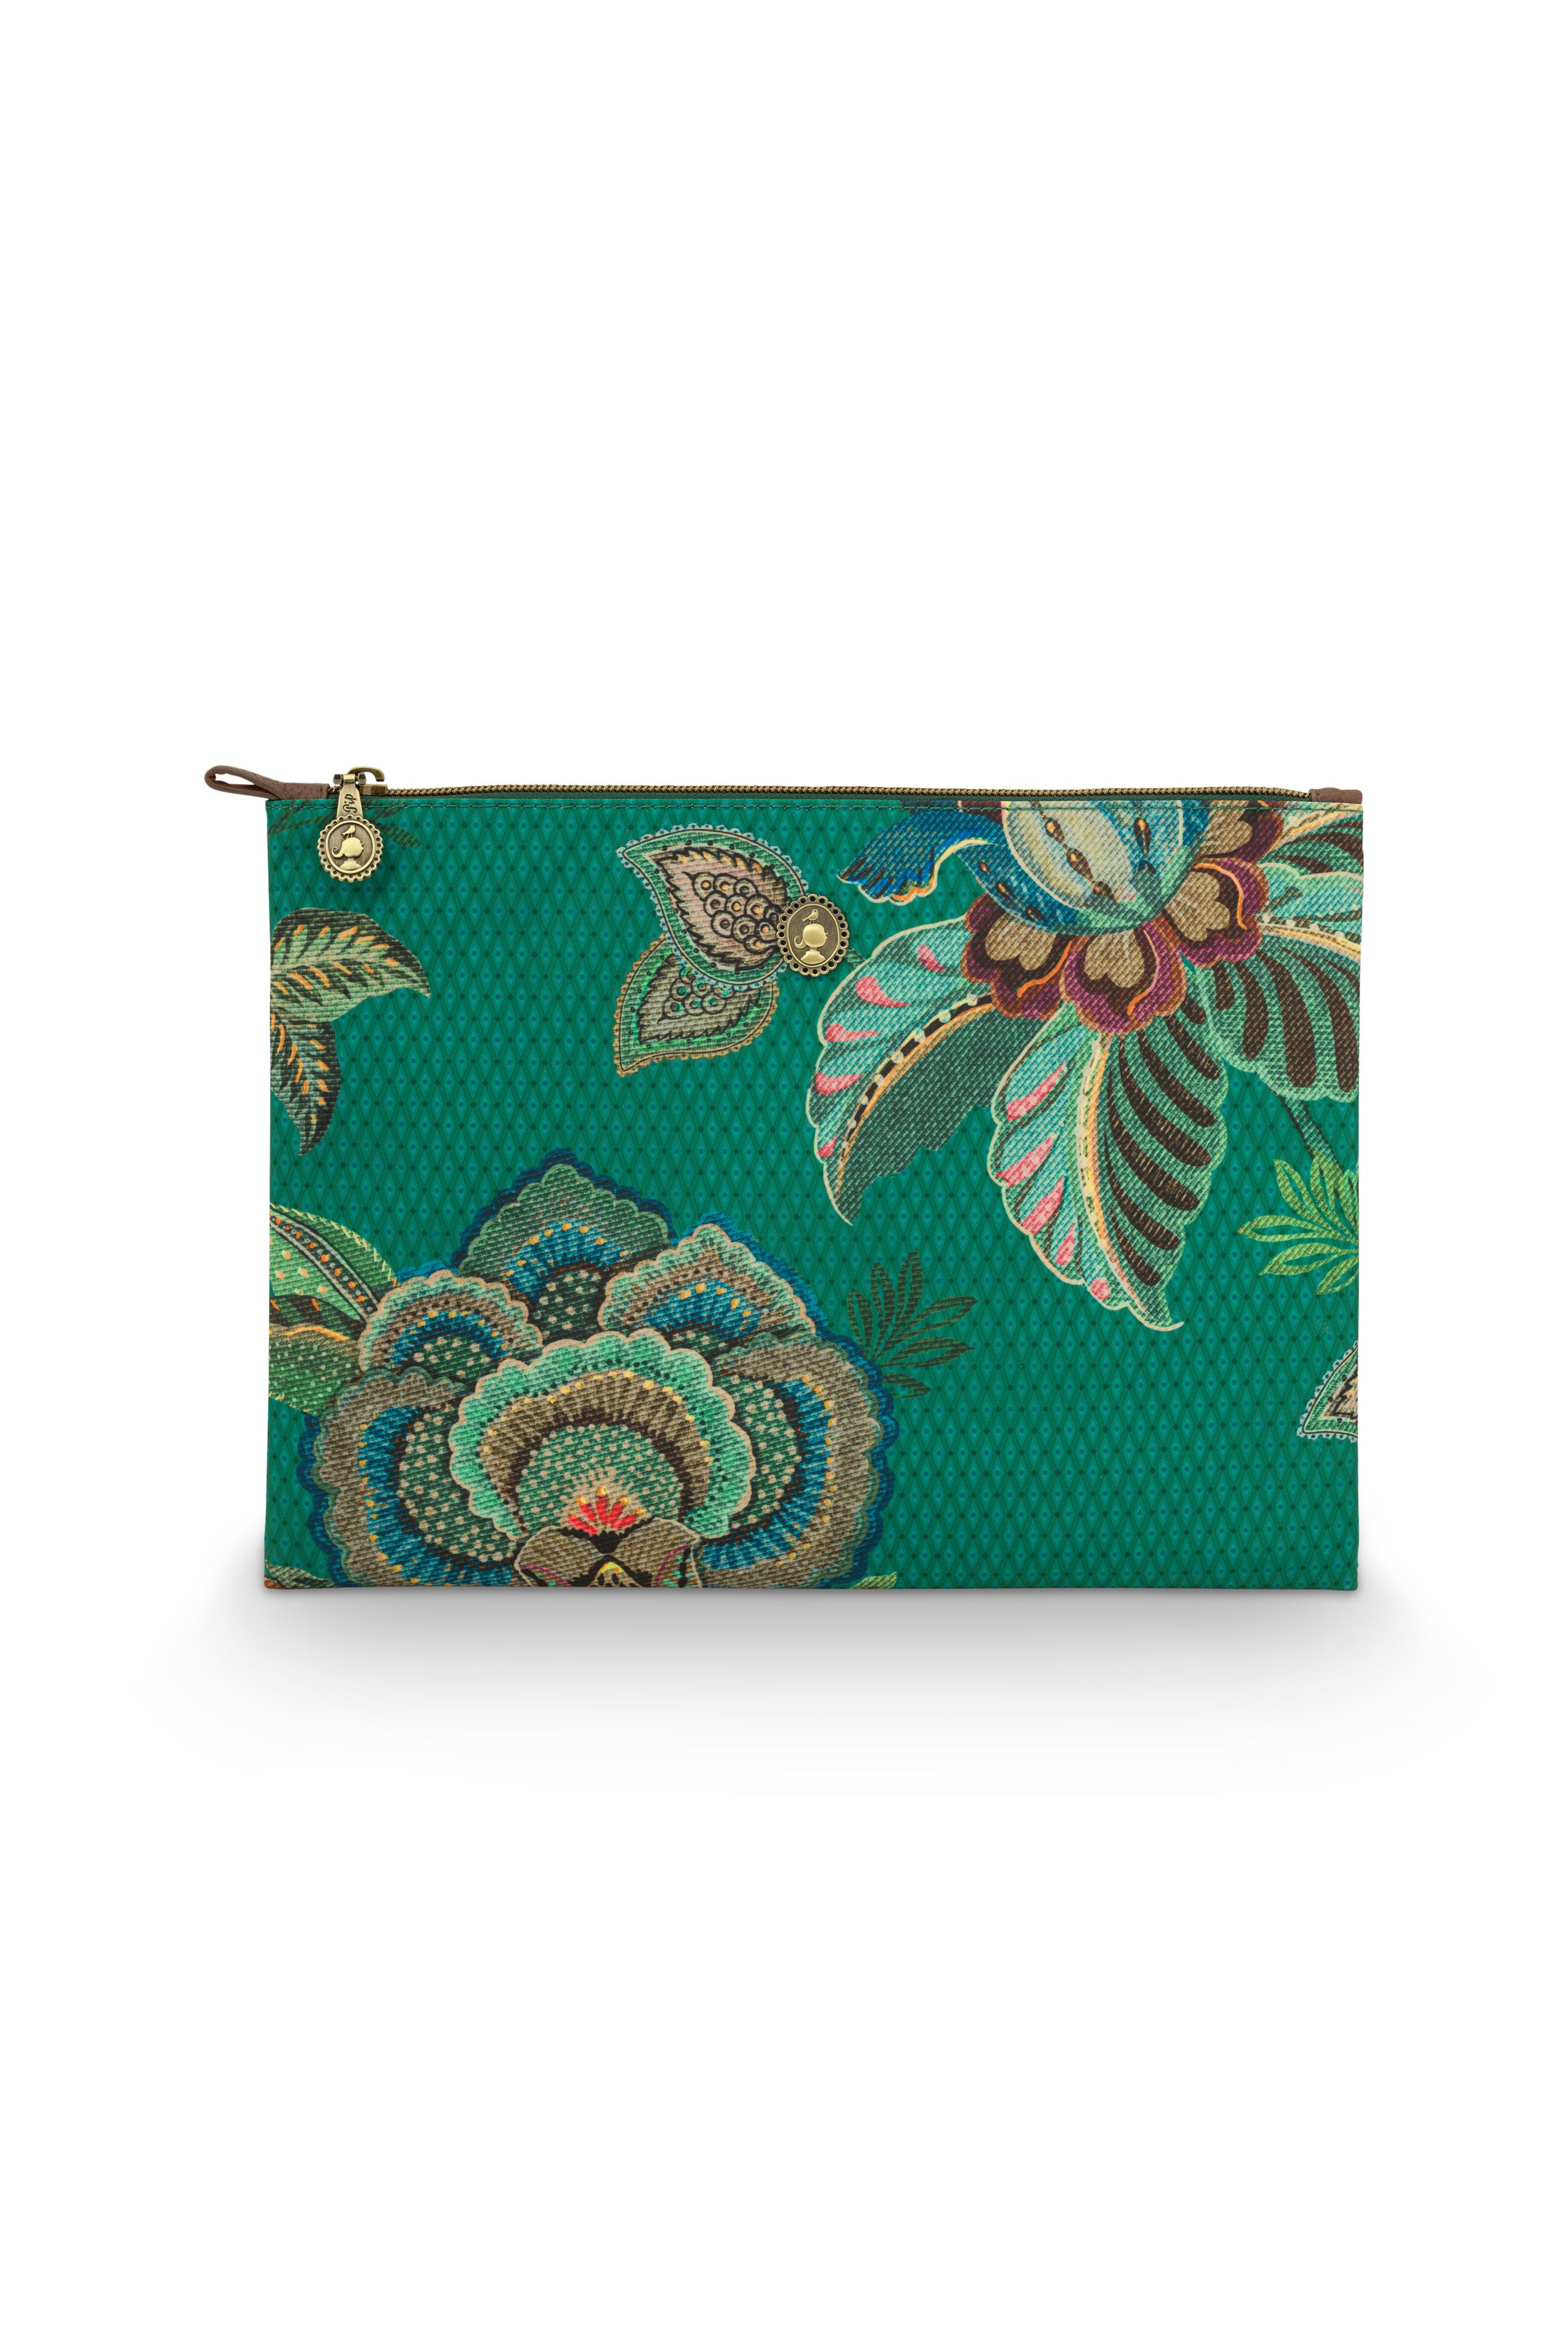 Charly Cos Flat Pouch Large Cece Fiore Grn 30x22x1 Gift